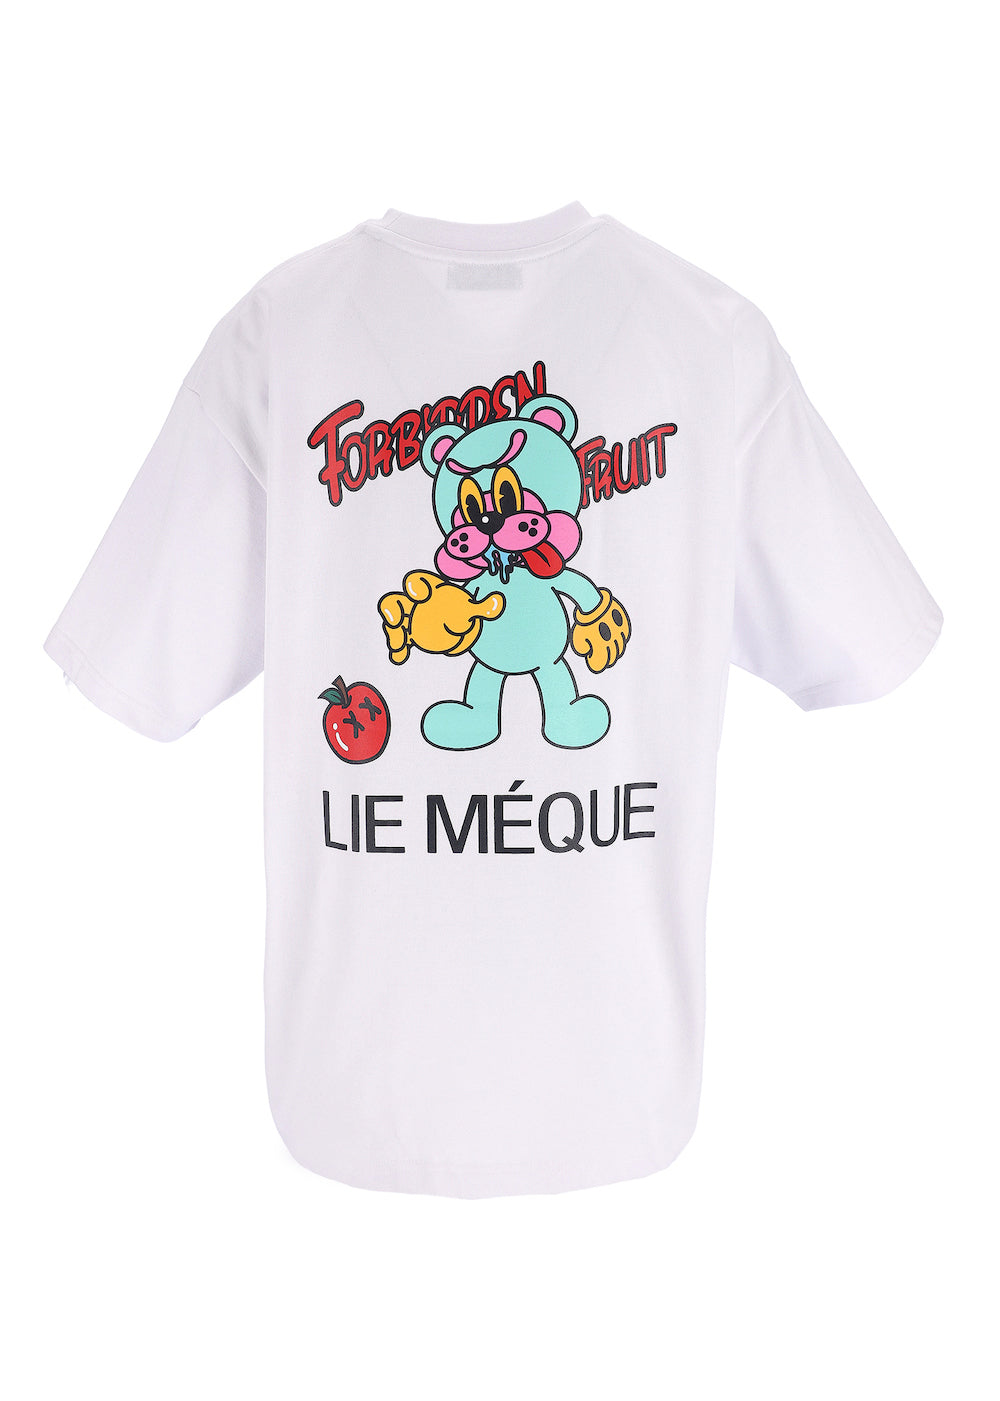 Poison Meque Oversized T-Shirt